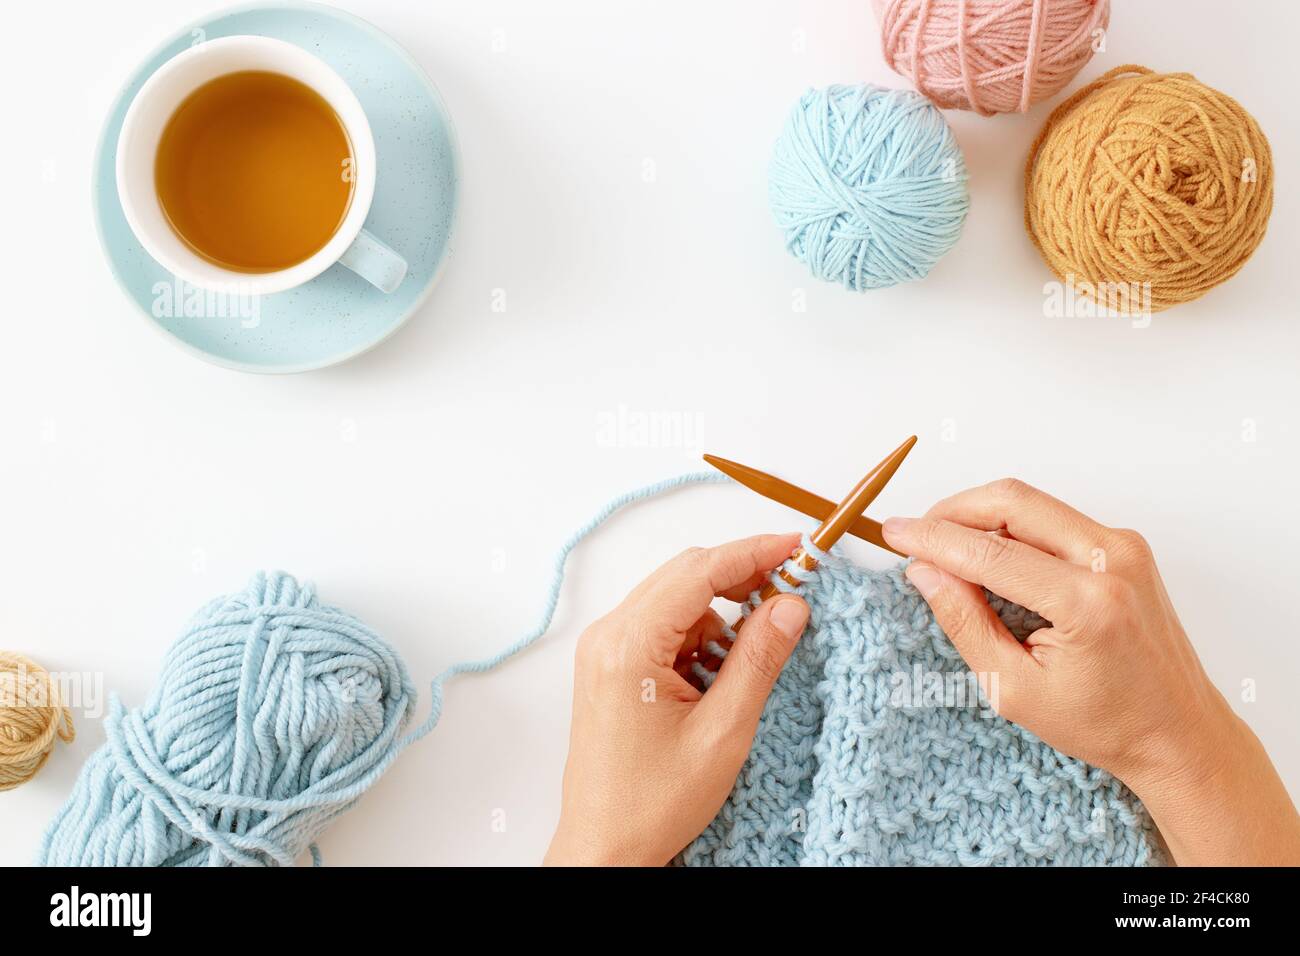 Woman hands knitting hat with needles and yarn Stock Photo